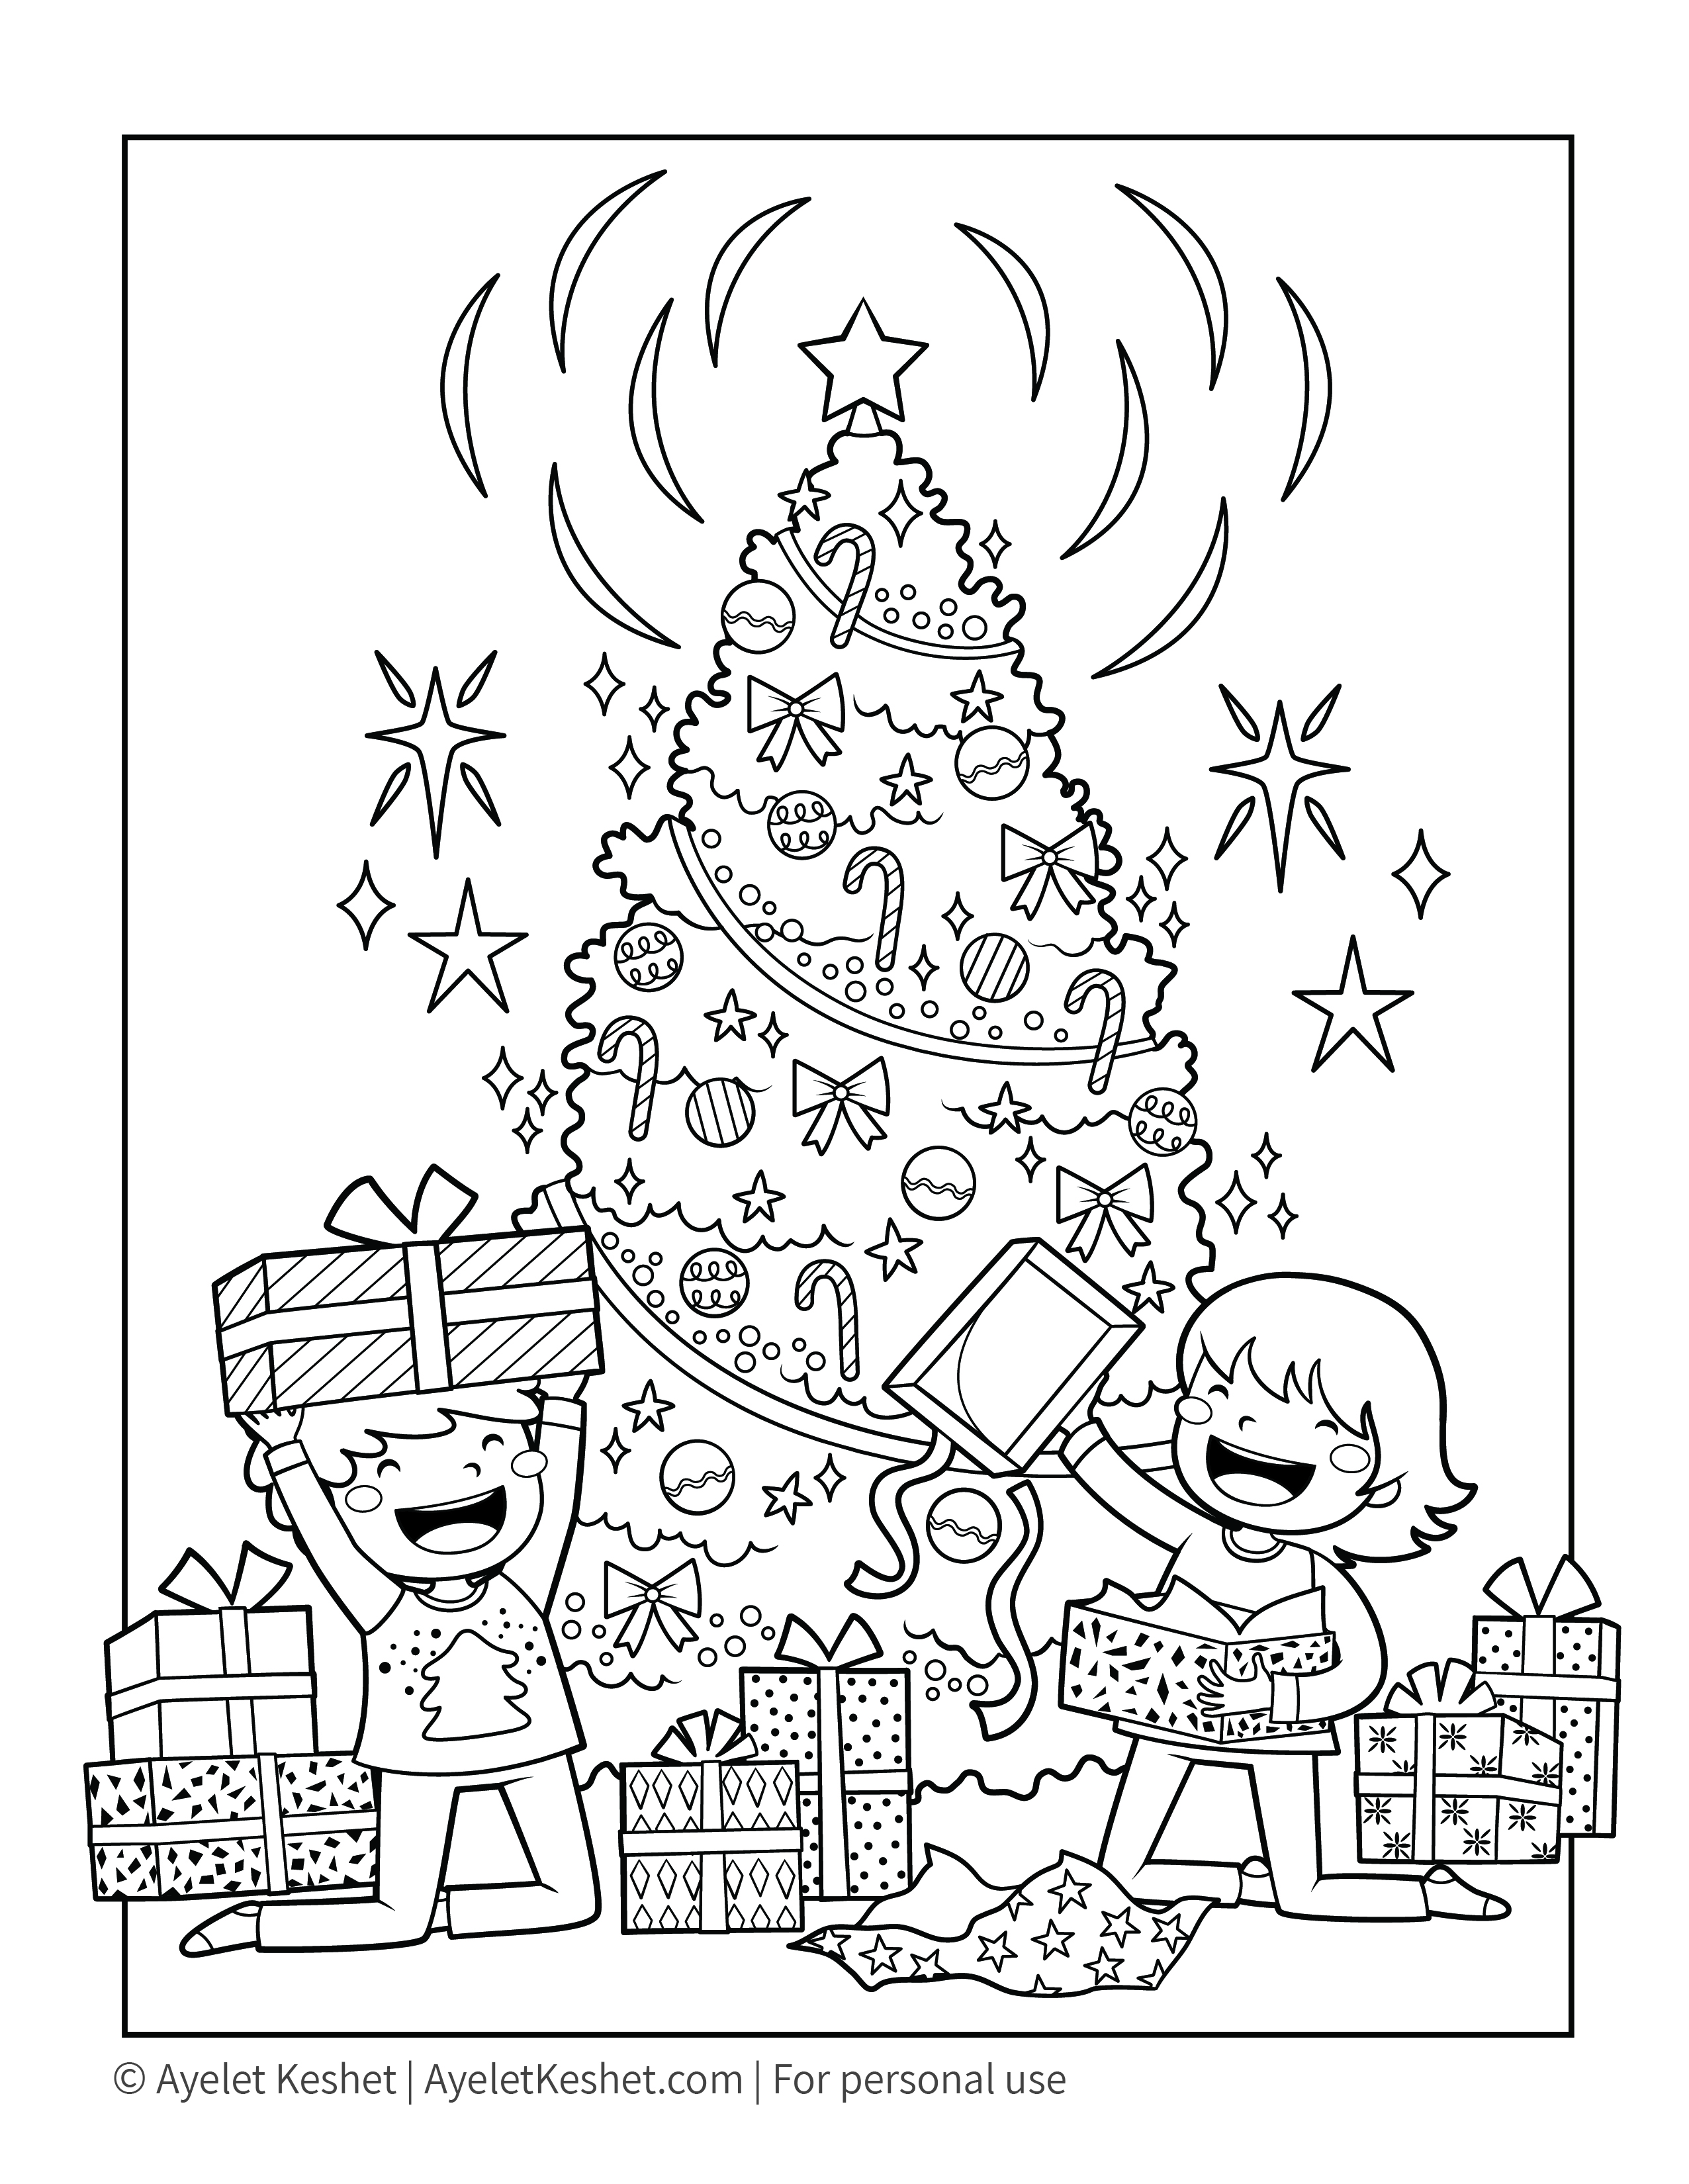 Free Printable Christmas Coloring Pages for kids - Ayelet Keshet